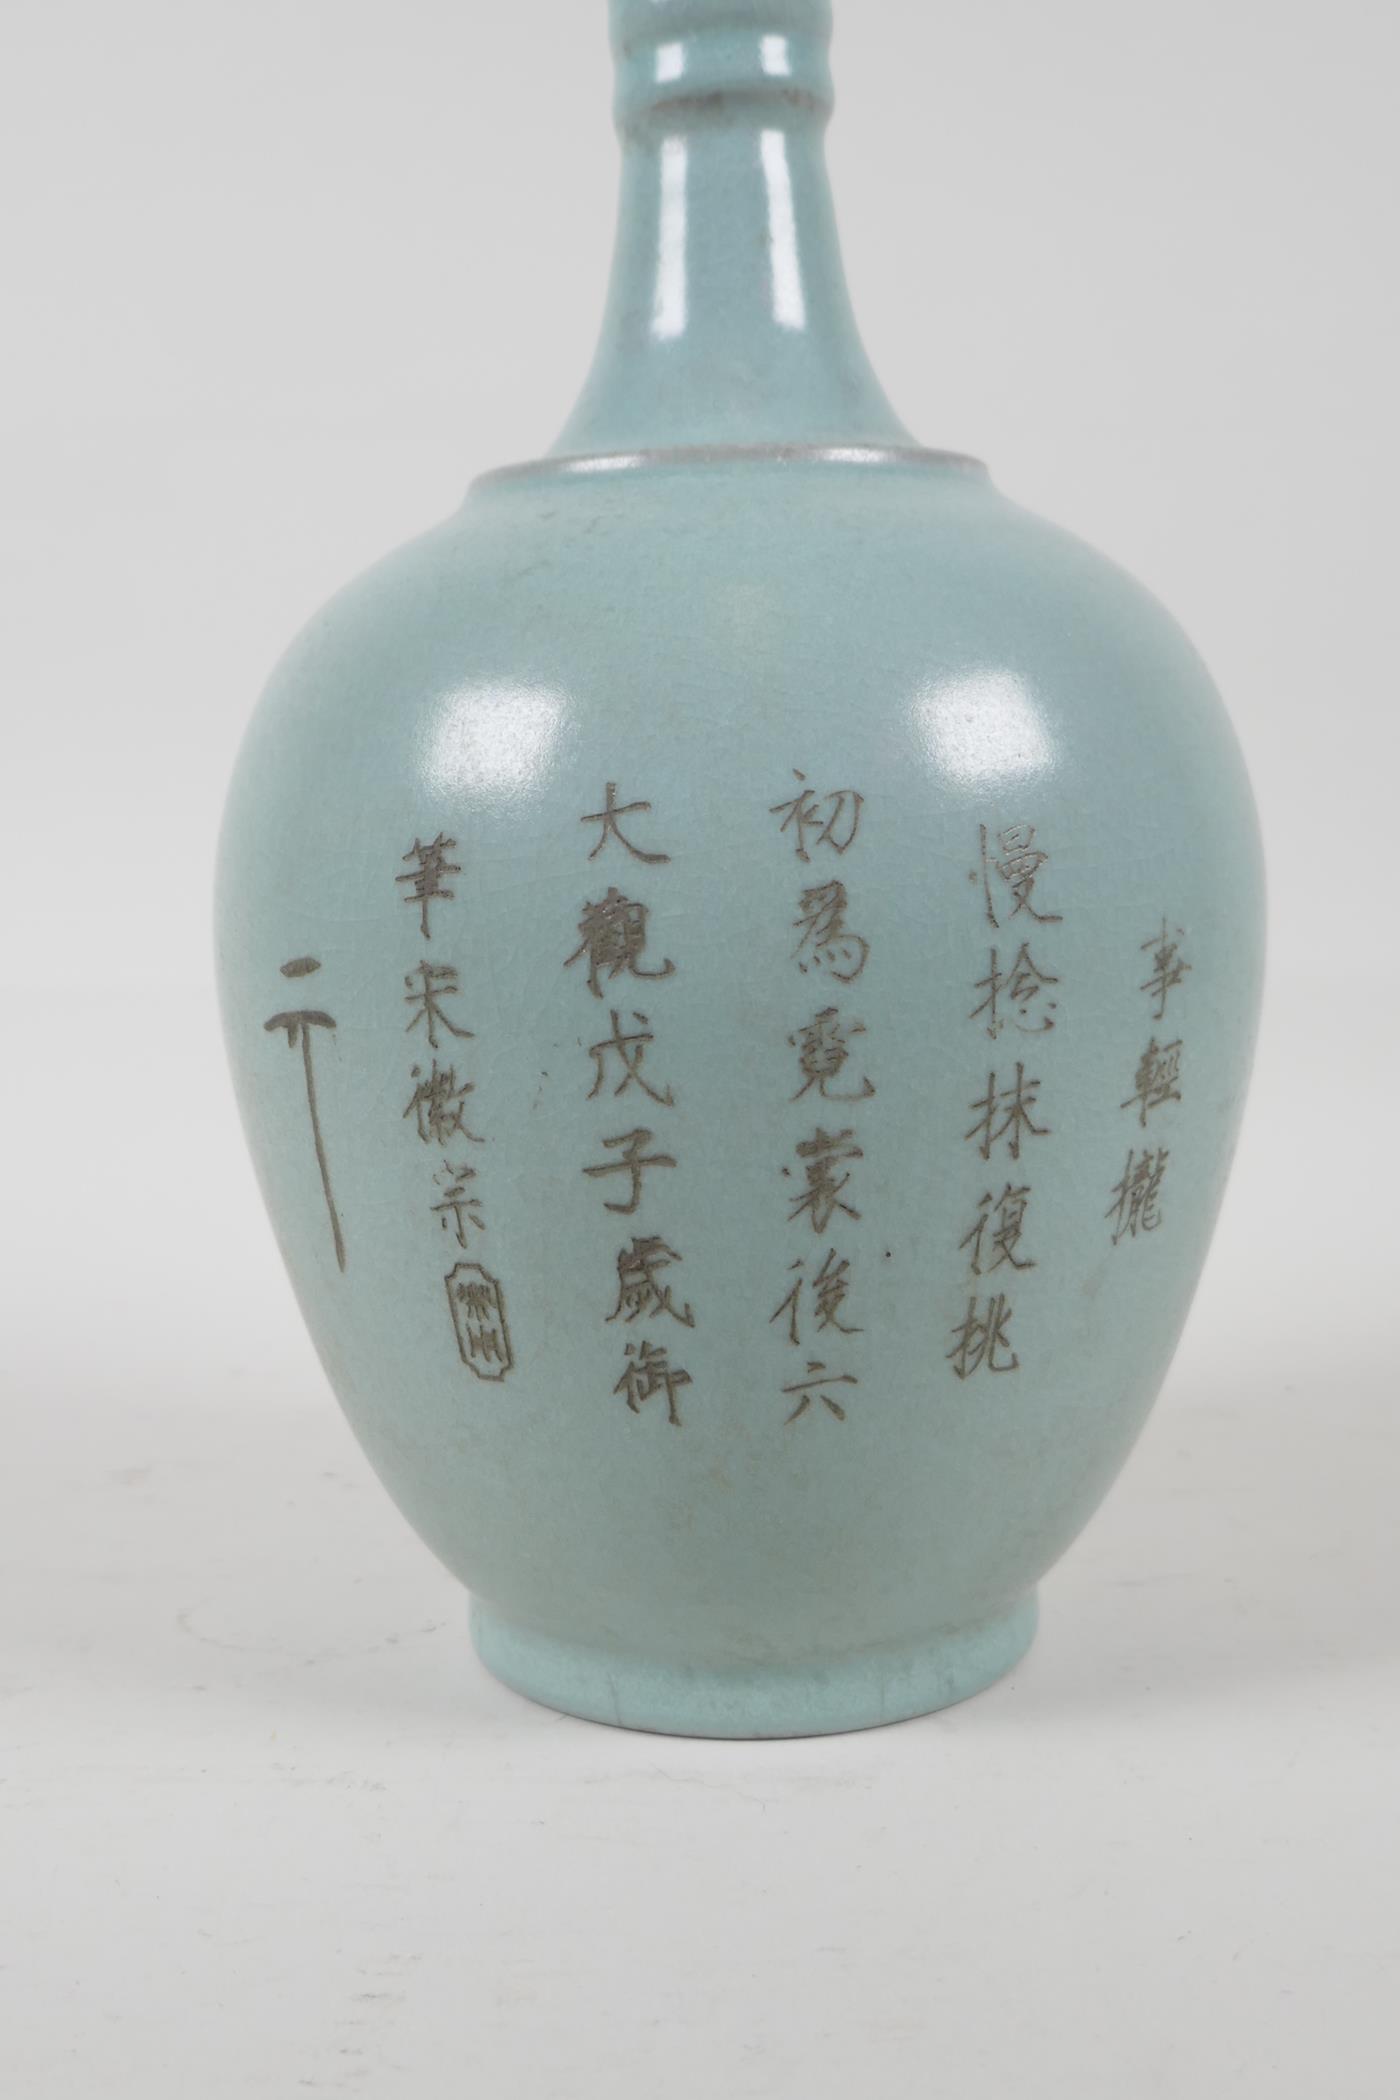 A celadon Ru ware style porcelain vase with engraved character inscription, 11" high - Image 3 of 4